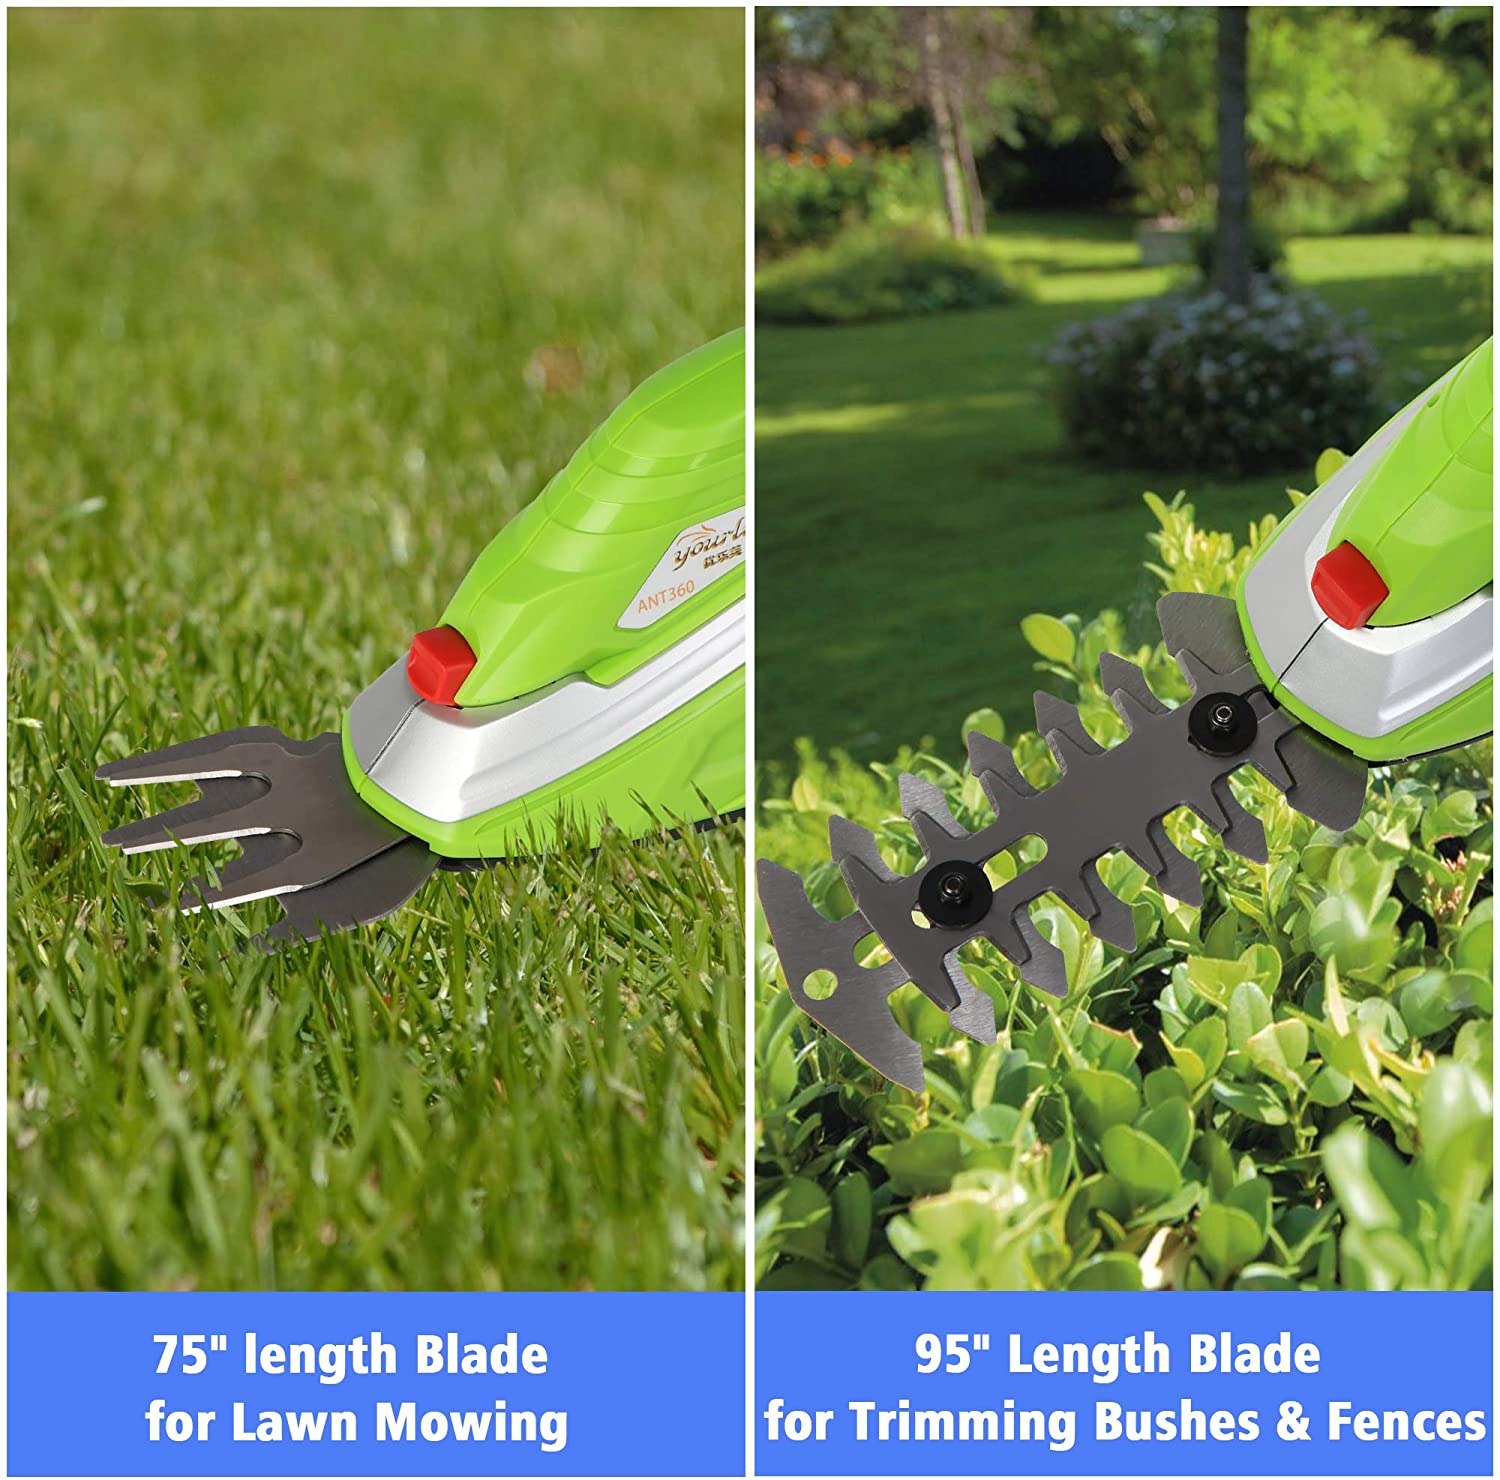 2-in-1 Cordless Hedge Trimmer 60min Shrubber w/Protective Shells Grass Shear Combo Rechargeable 3.6V Li-Ion Battery 2.45 lbs for Easy-Carry - Luckyermore